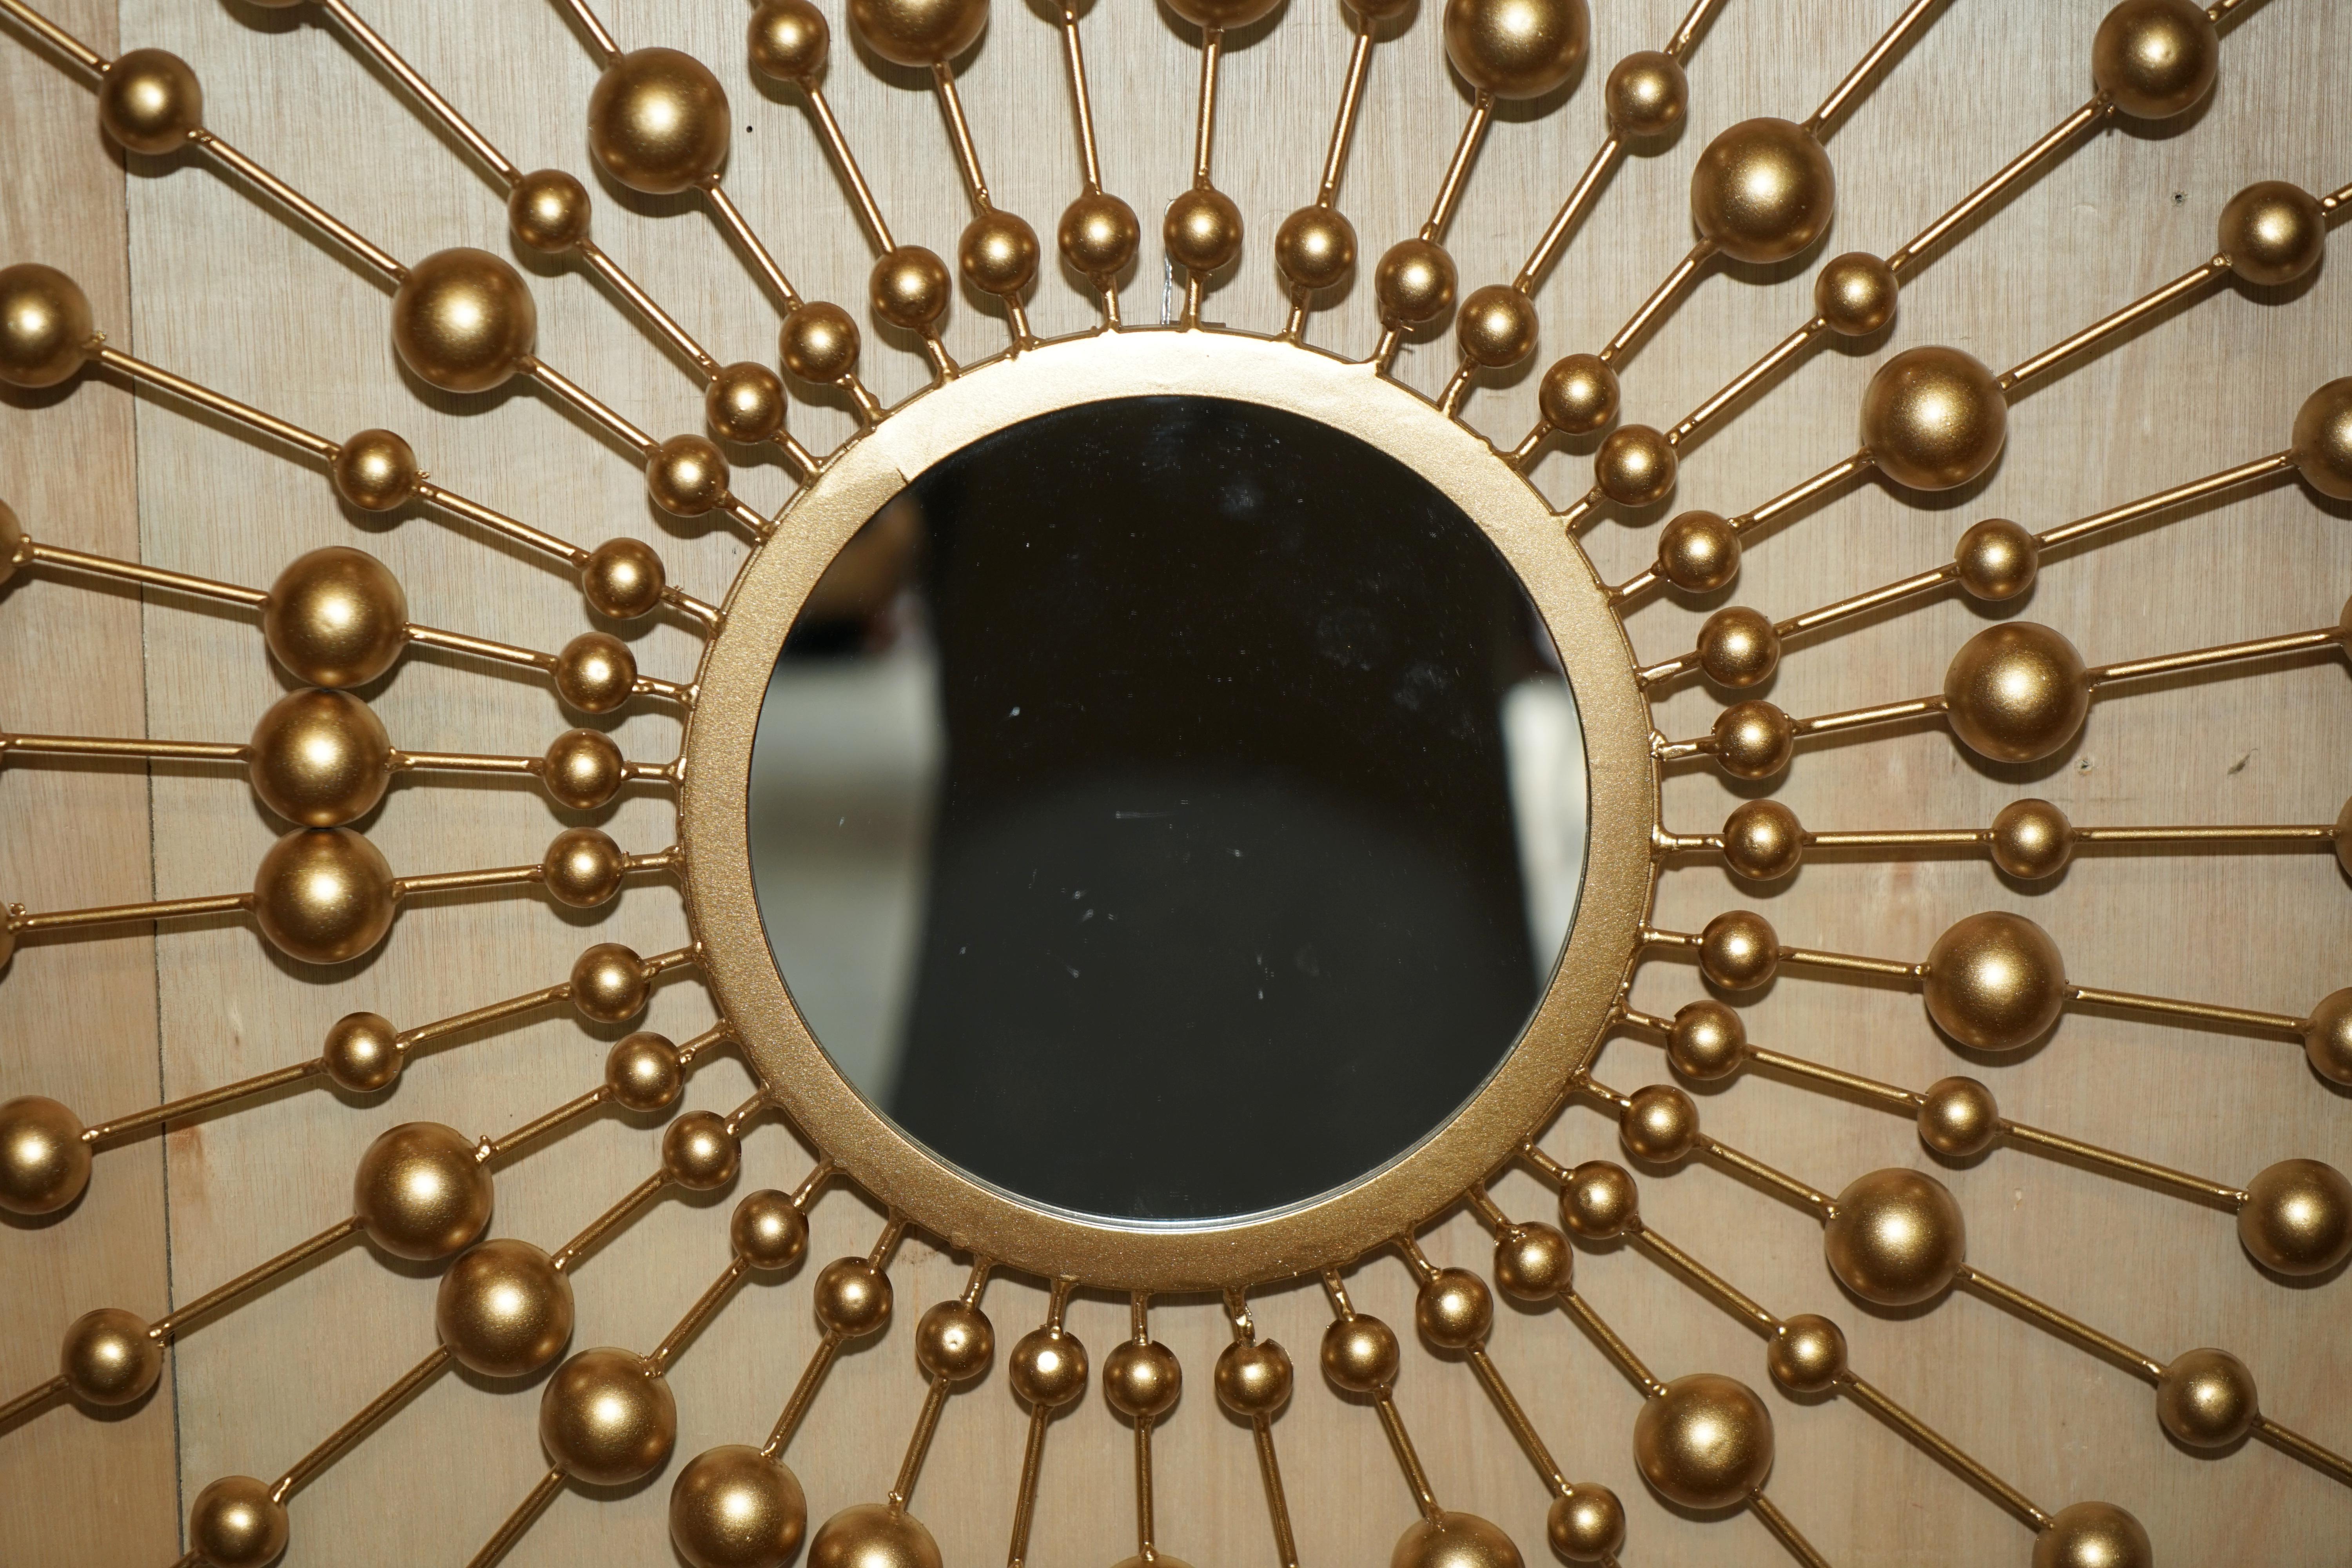 Royal House Antiques

Royal House Antiques is delighted to offer for sale this large decorative sun style mirror which has one small central mirror that is surrounded by 36 smaller mirrors

Please note the delivery fee listed is just a guide, it